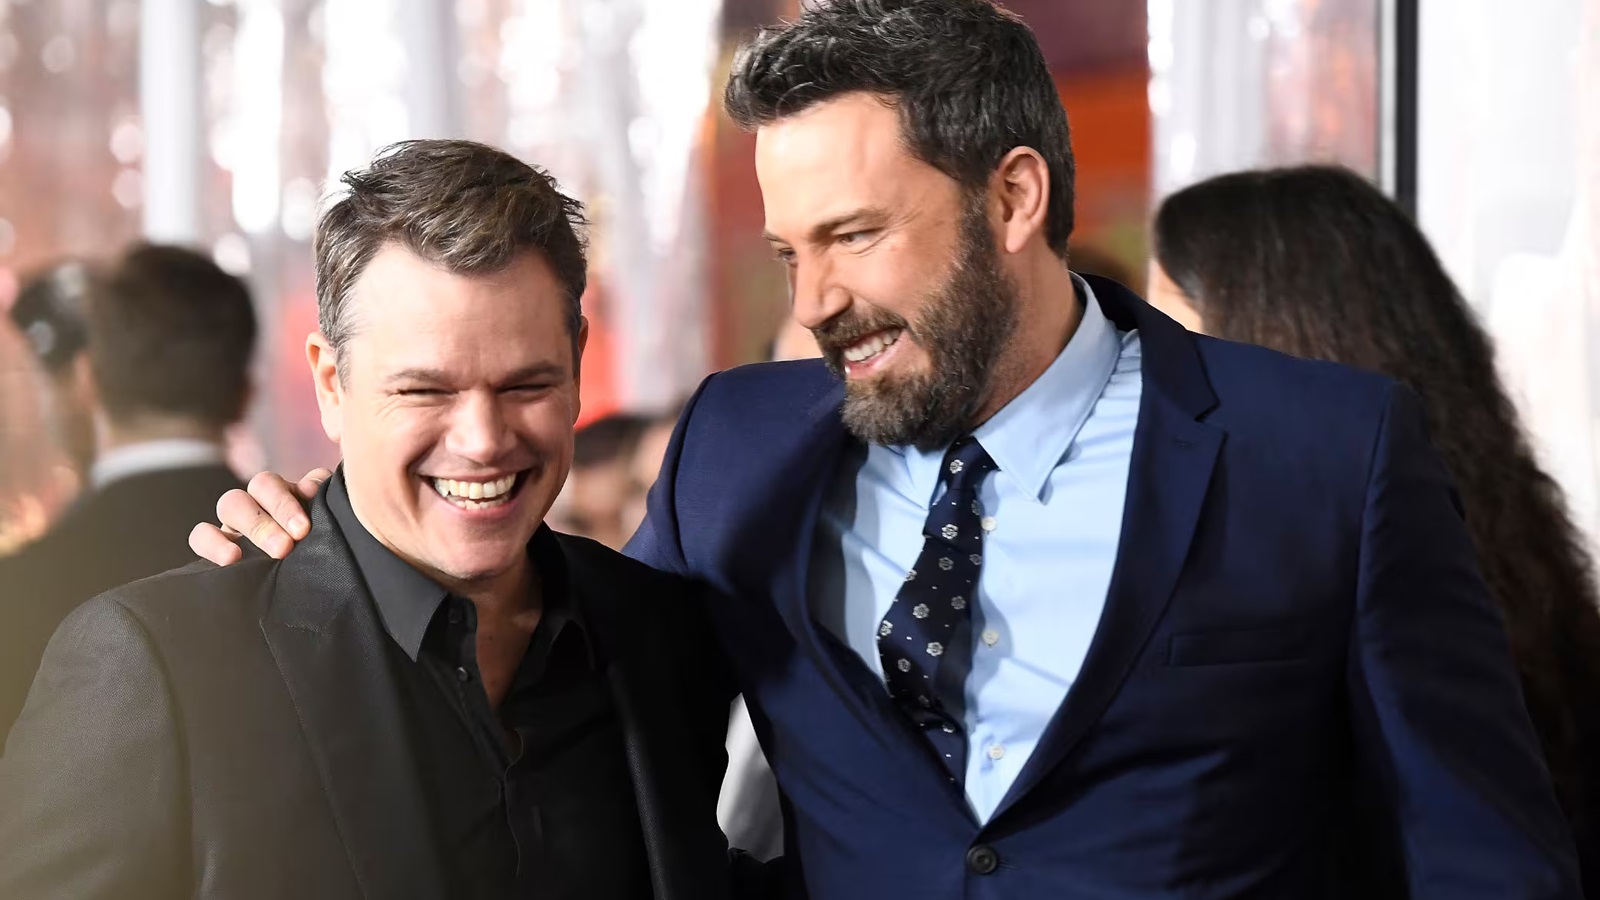 Matt Damon on friendship with Ben Affleck: 'We became even closer after my father died'